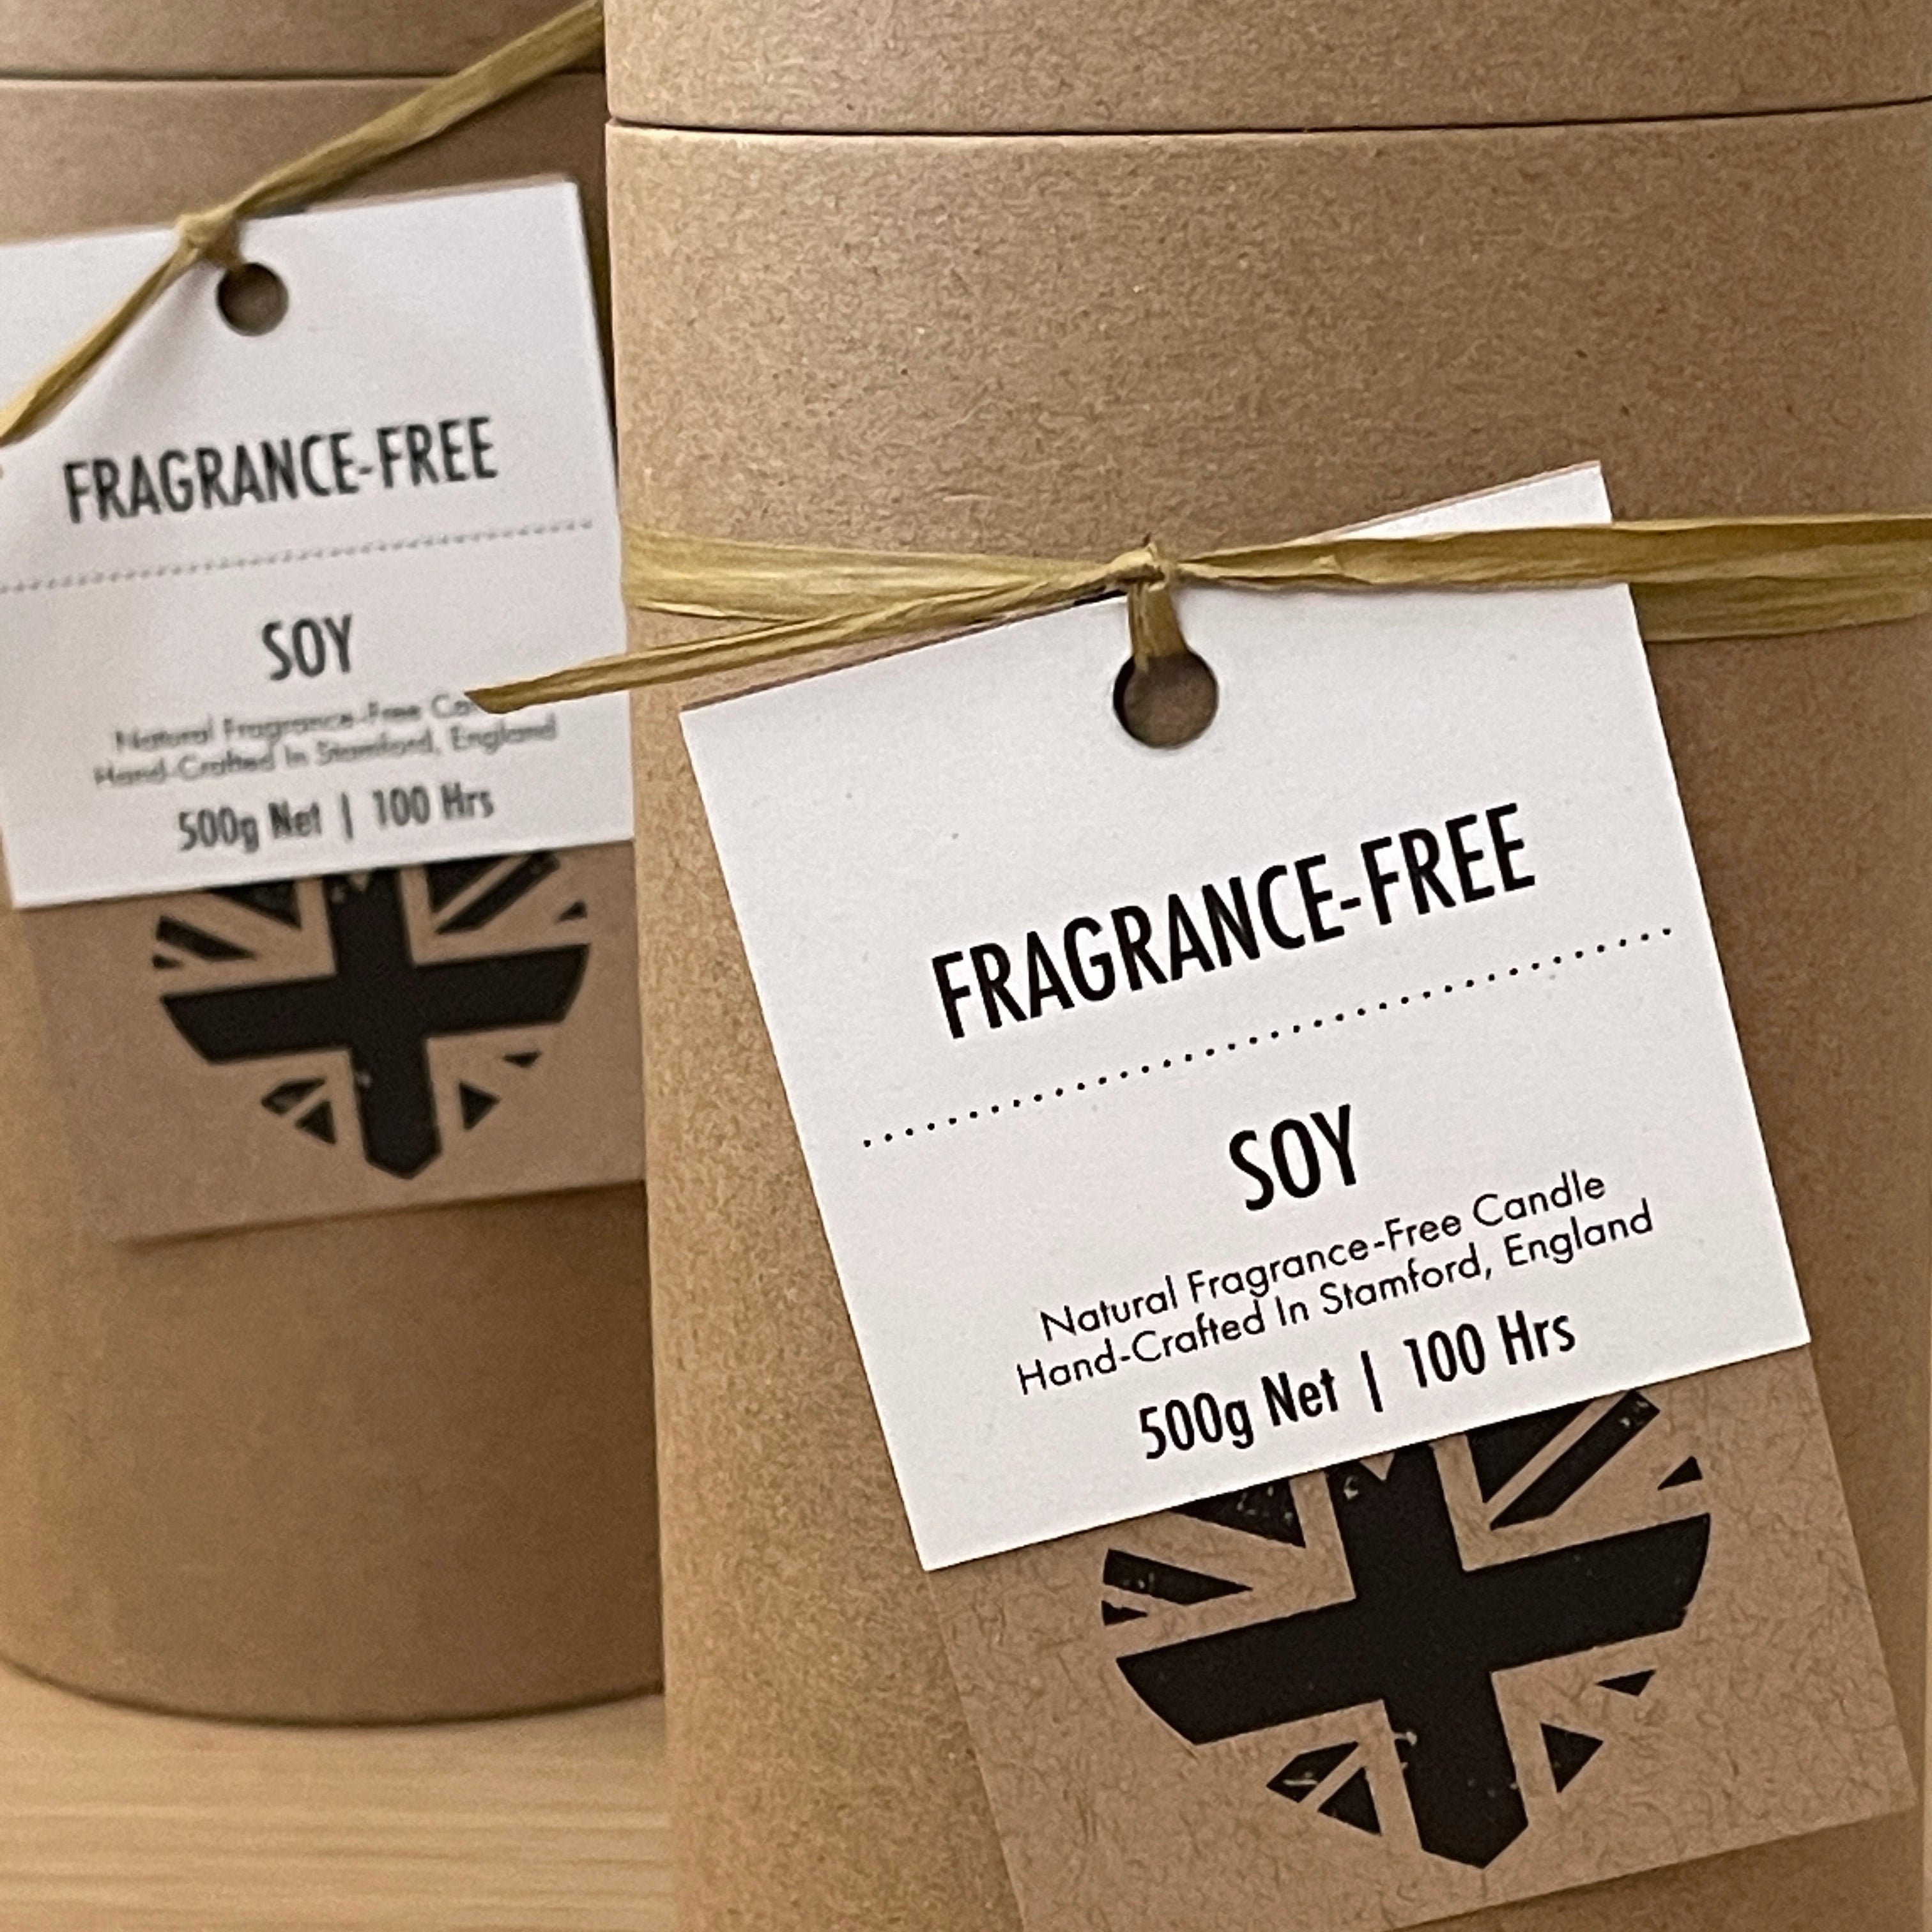 Fragrance-Free - Everyday Soy Candle (500g Net)